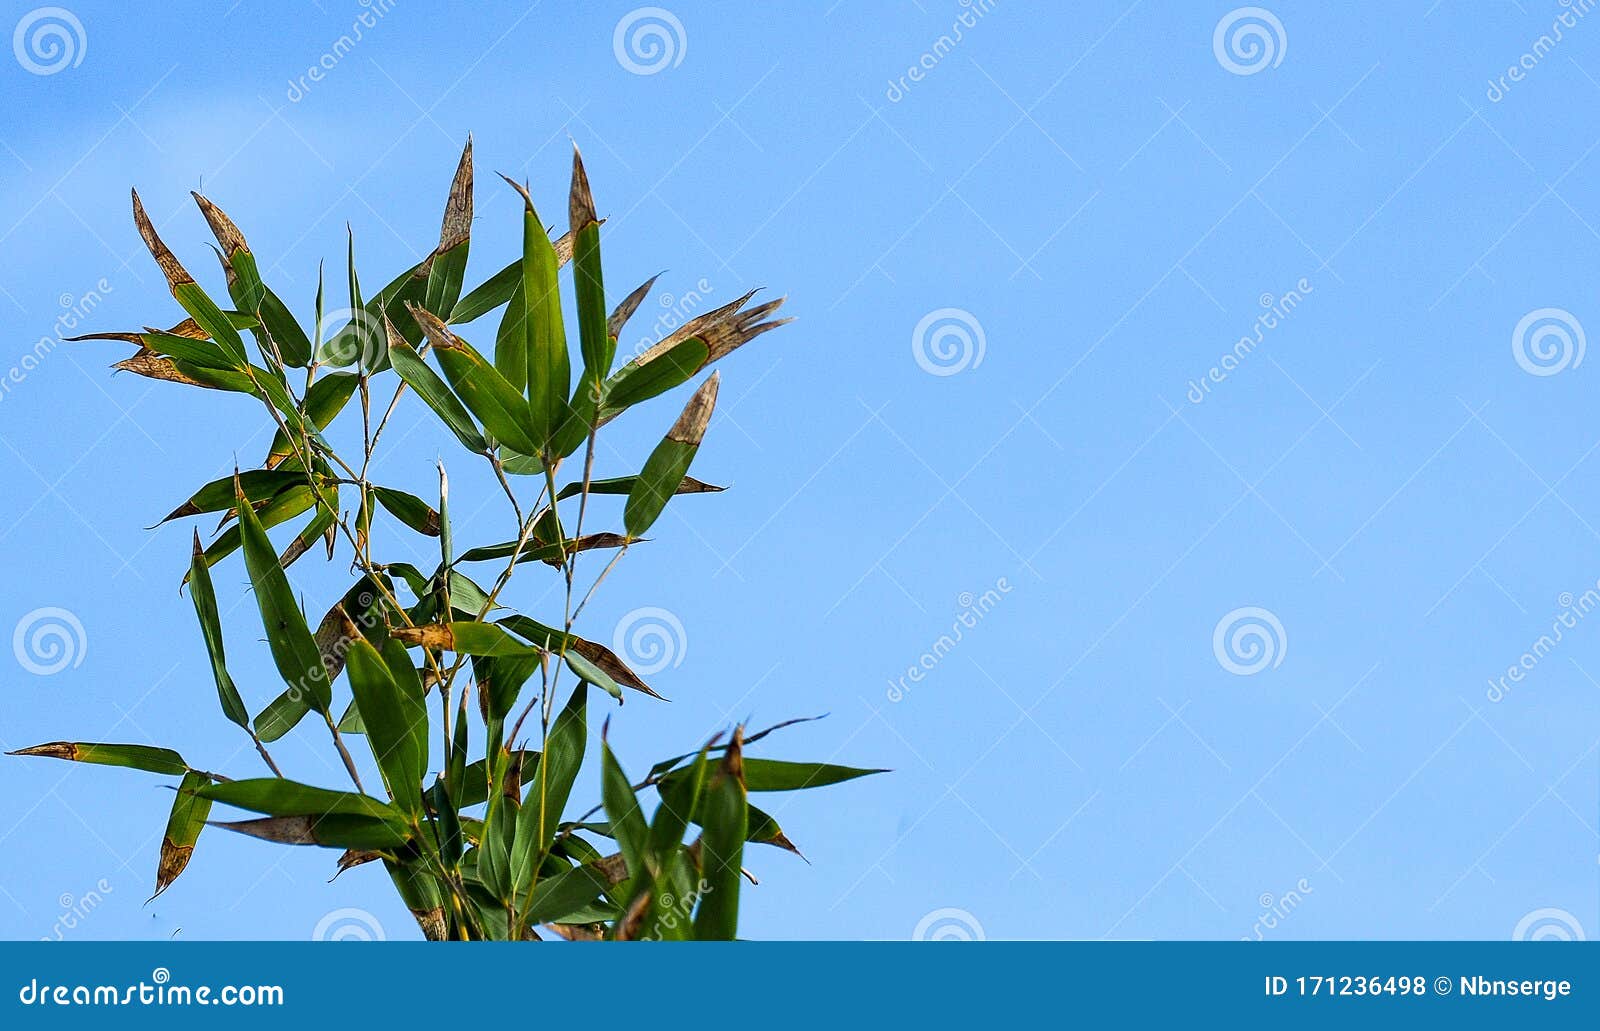 Bamboo Leaves Turning Brown In Winter Against Blue Sky Background Or Wallpaper Stock Photo Image Of Nature Asia